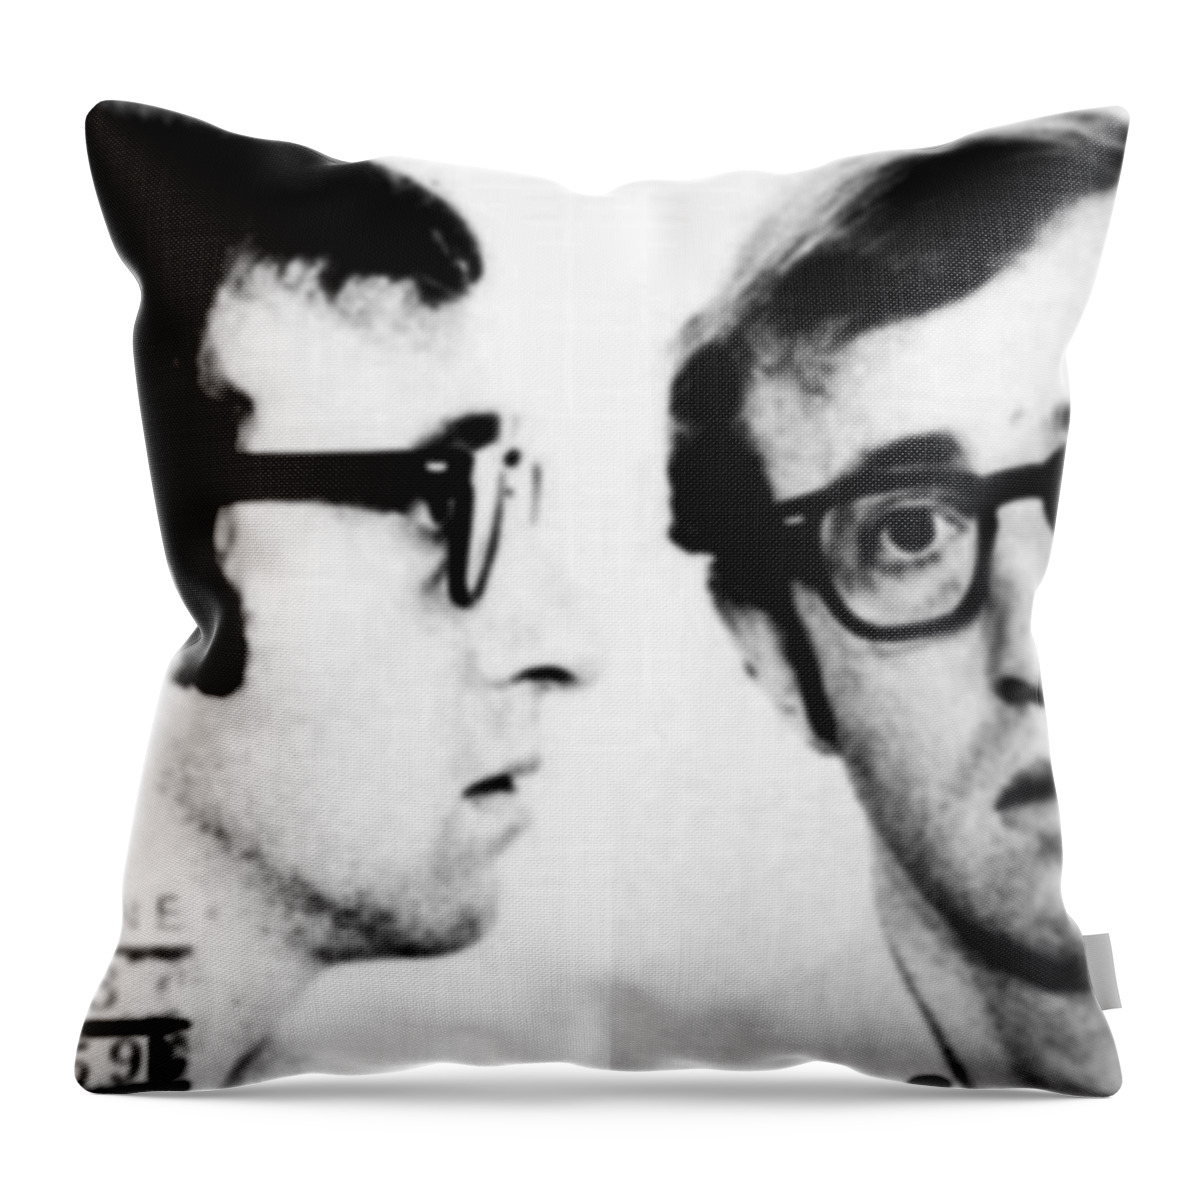 Woody Allen Throw Pillow featuring the painting Woody Allen Mug Shot For Film Character Virgil 1969 by Tony Rubino